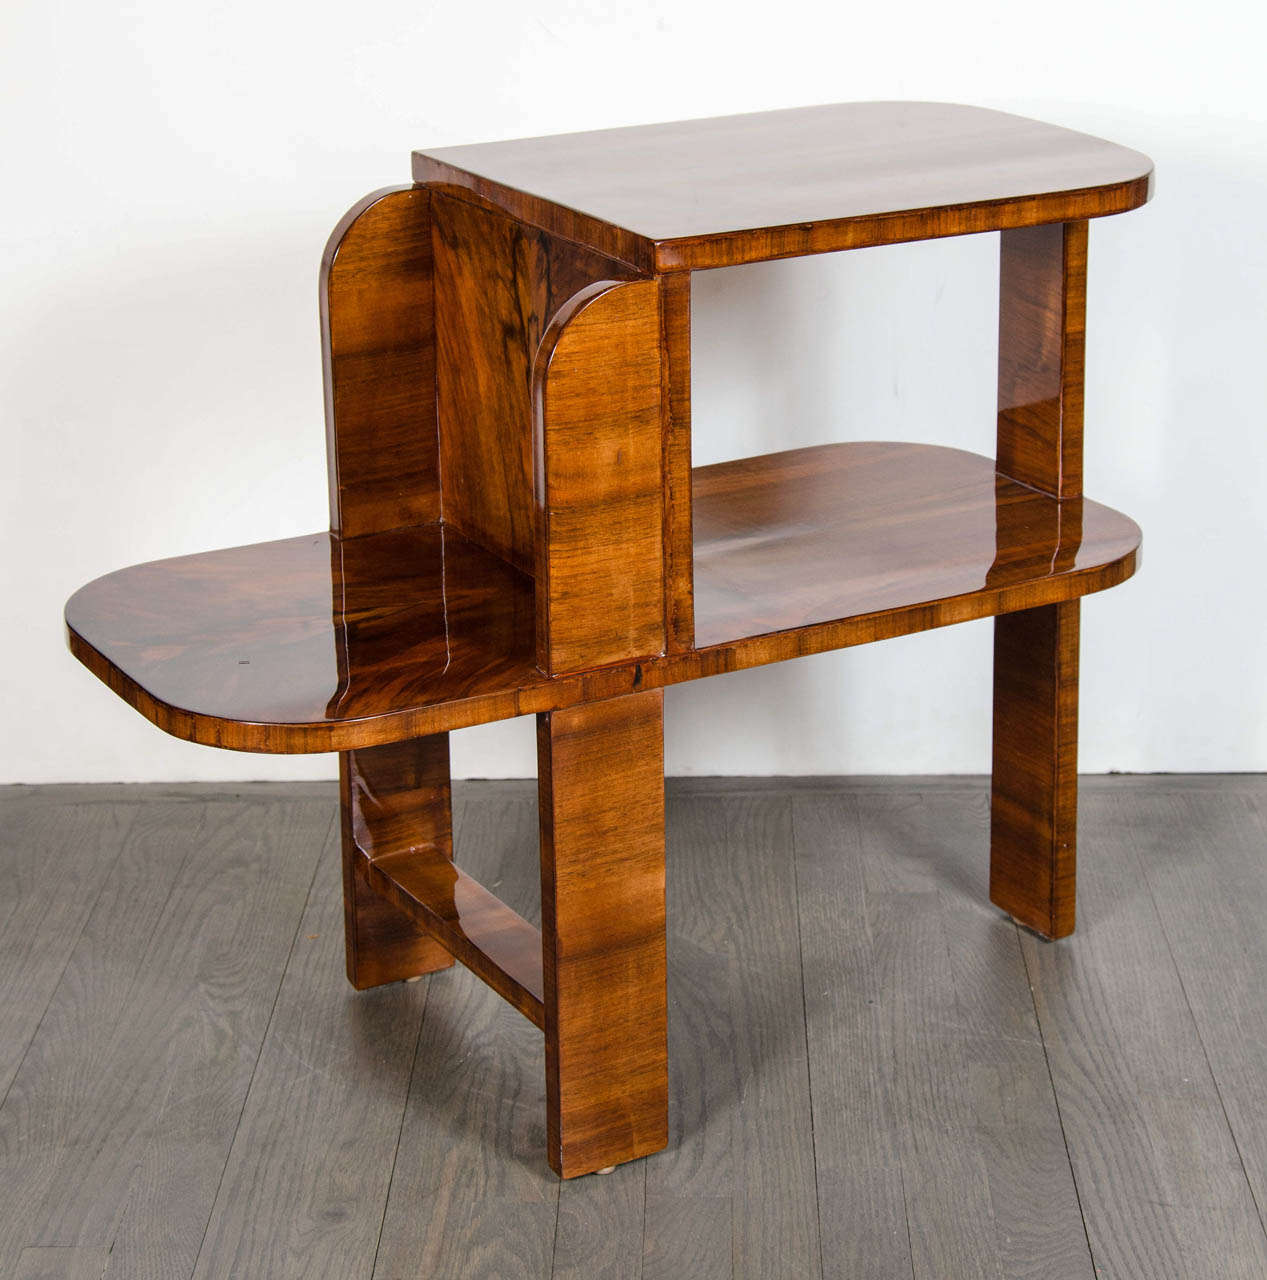 Art Deco Machine Age side table in exotic burled Walnut.  This great occasional table with a bullet shaped design has a stacked, two-tiered design on one side with an exposed bottom tier shelf for more surface space.  It has an open design which